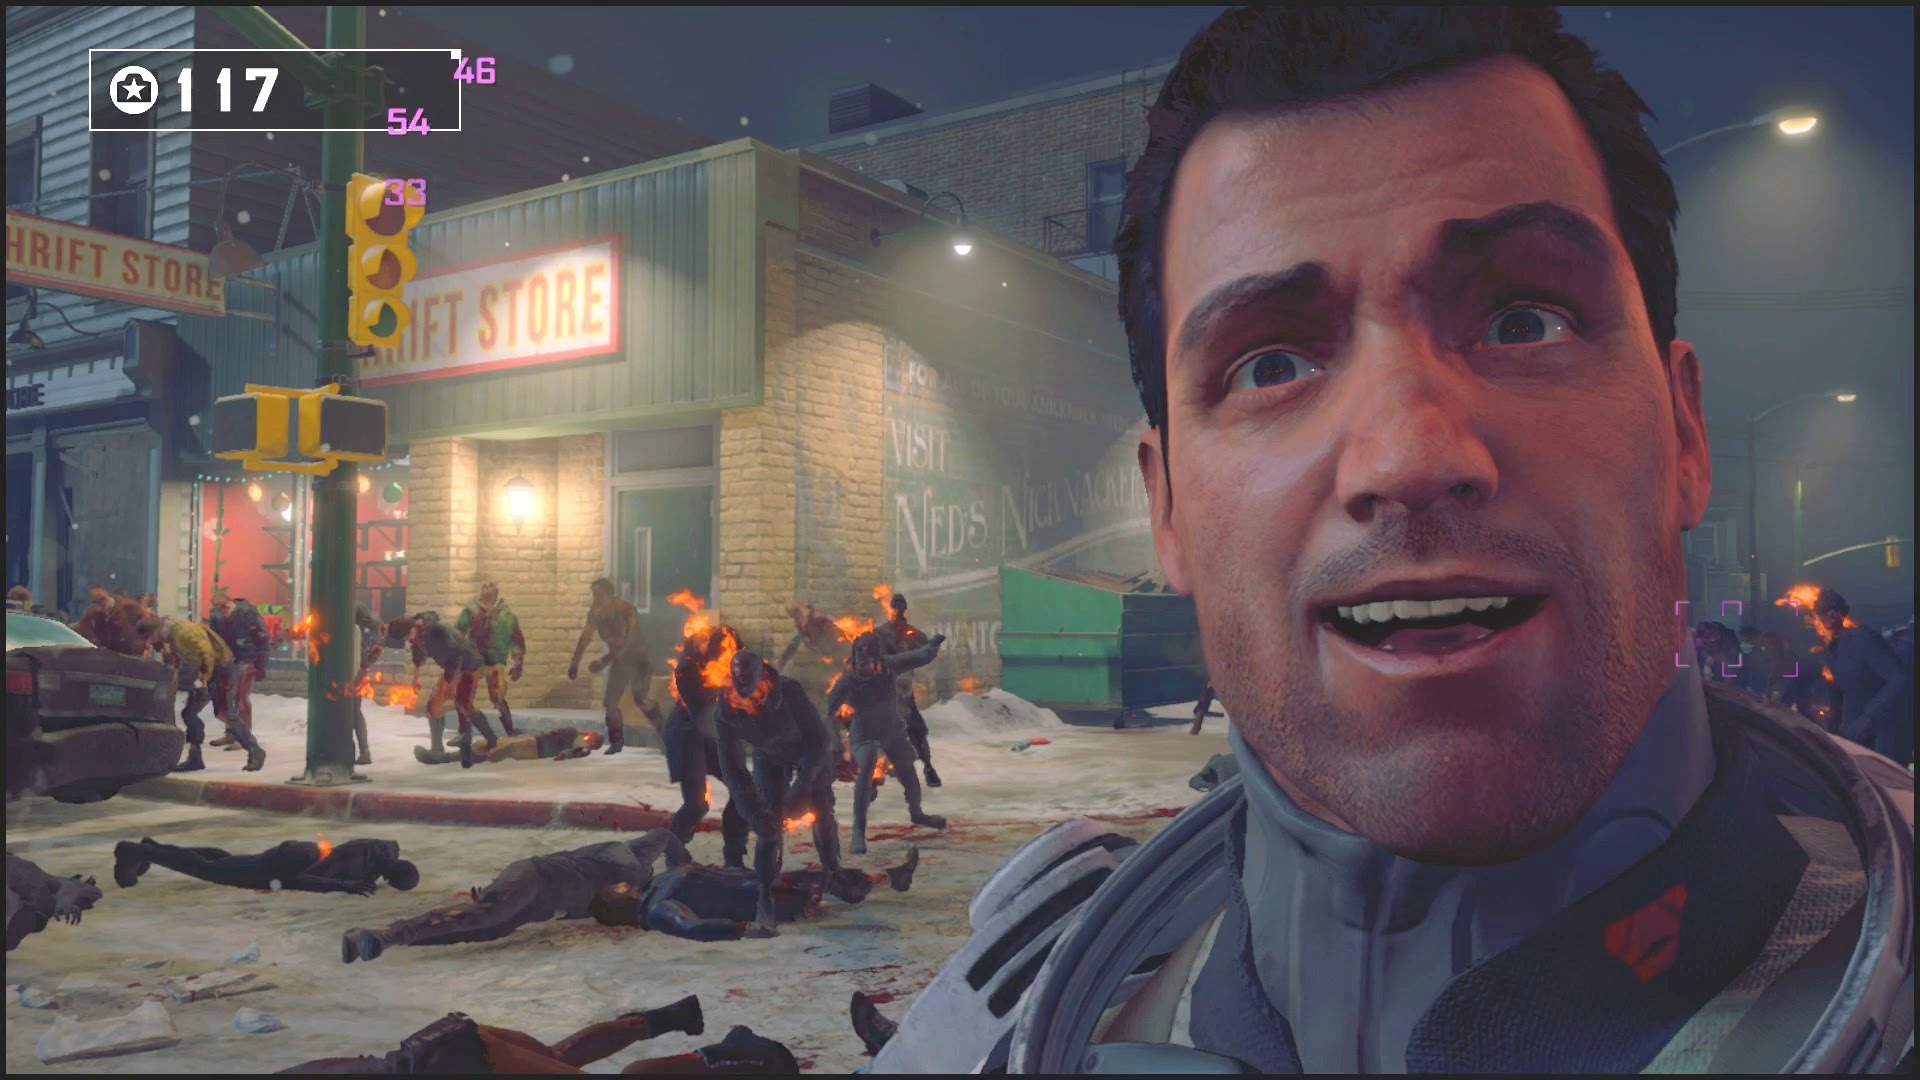 Dead Rising 4: Frank's Big Package - PlayStation 4 